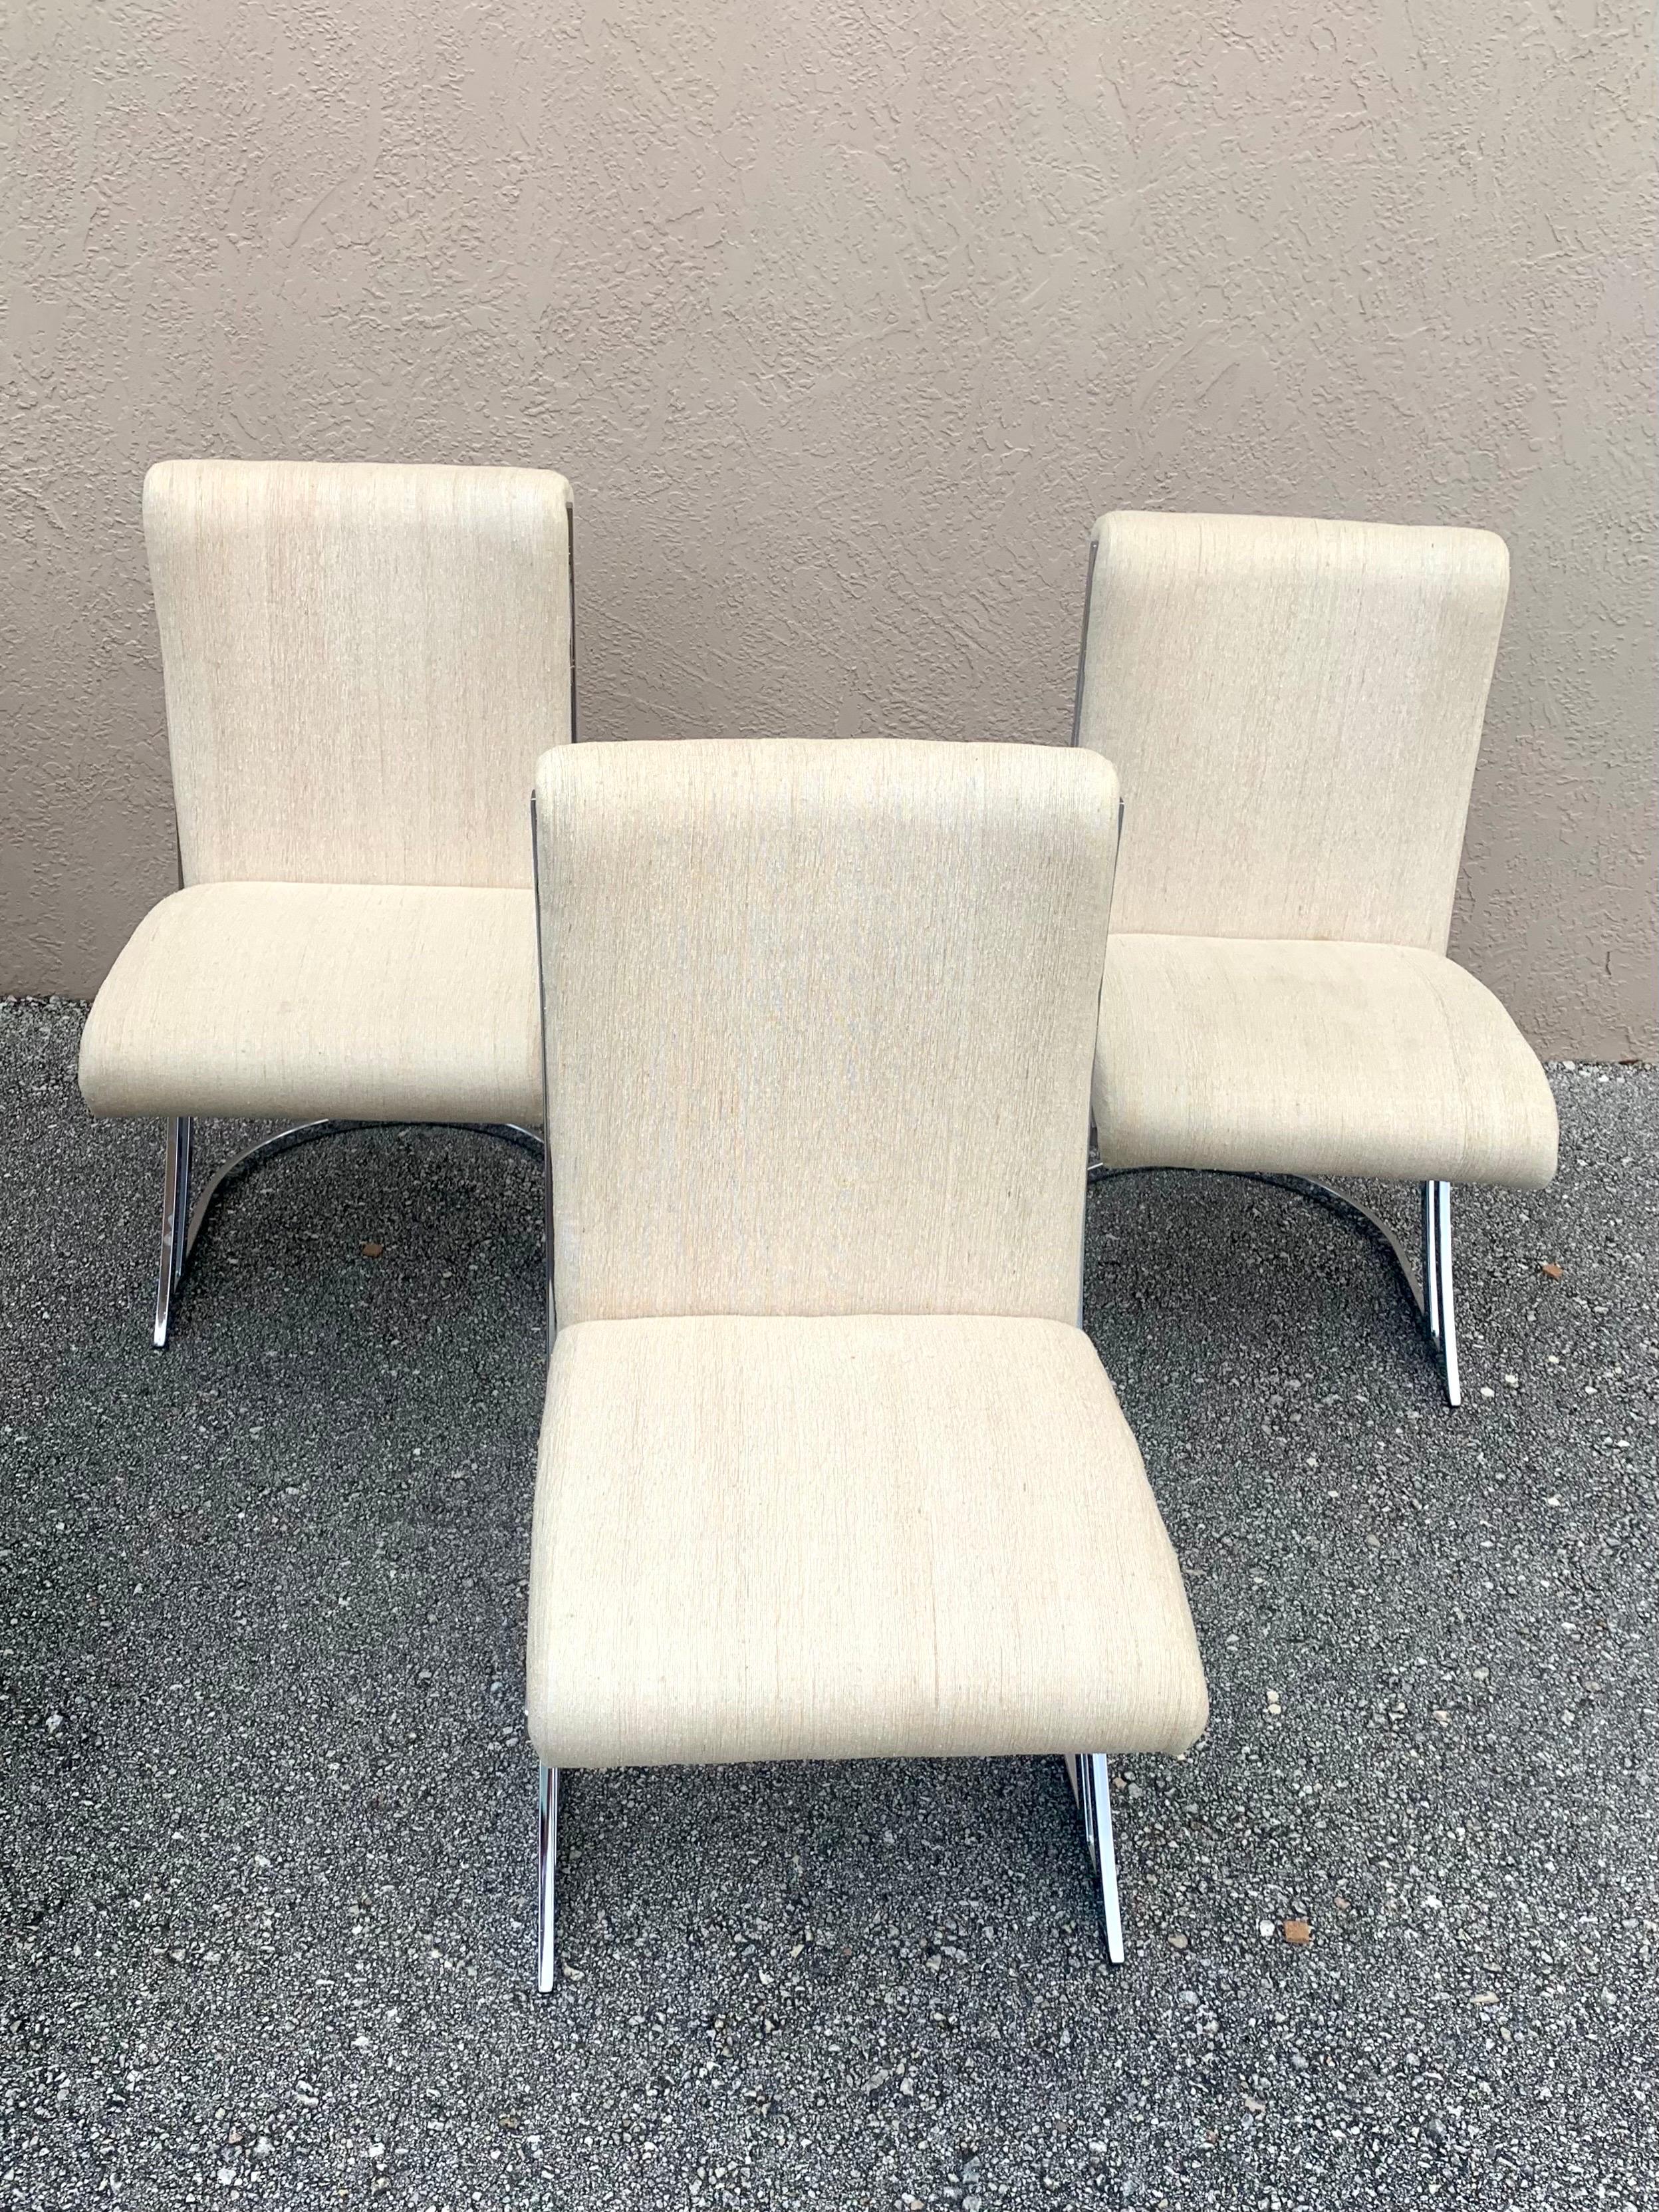 American Set of Six Pierre Cardin Crome Dining Chairs, Mid-Century Modern For Sale